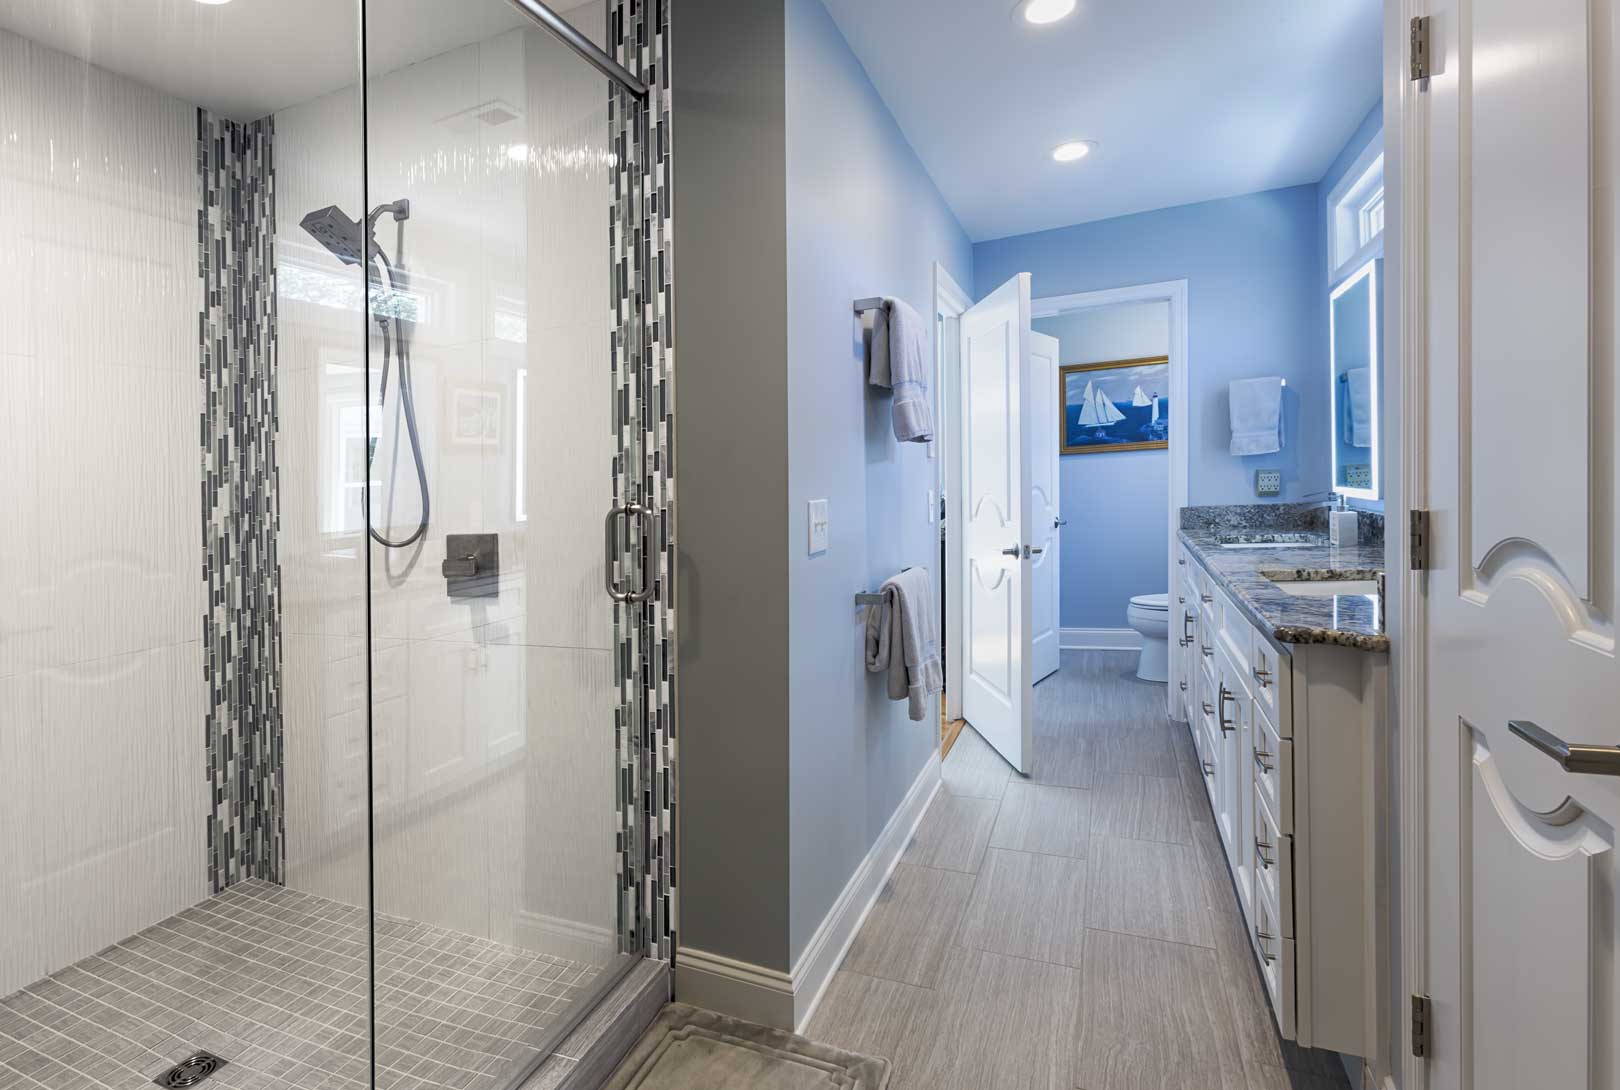 A Remodeled Master Bathroom By A Local Builder